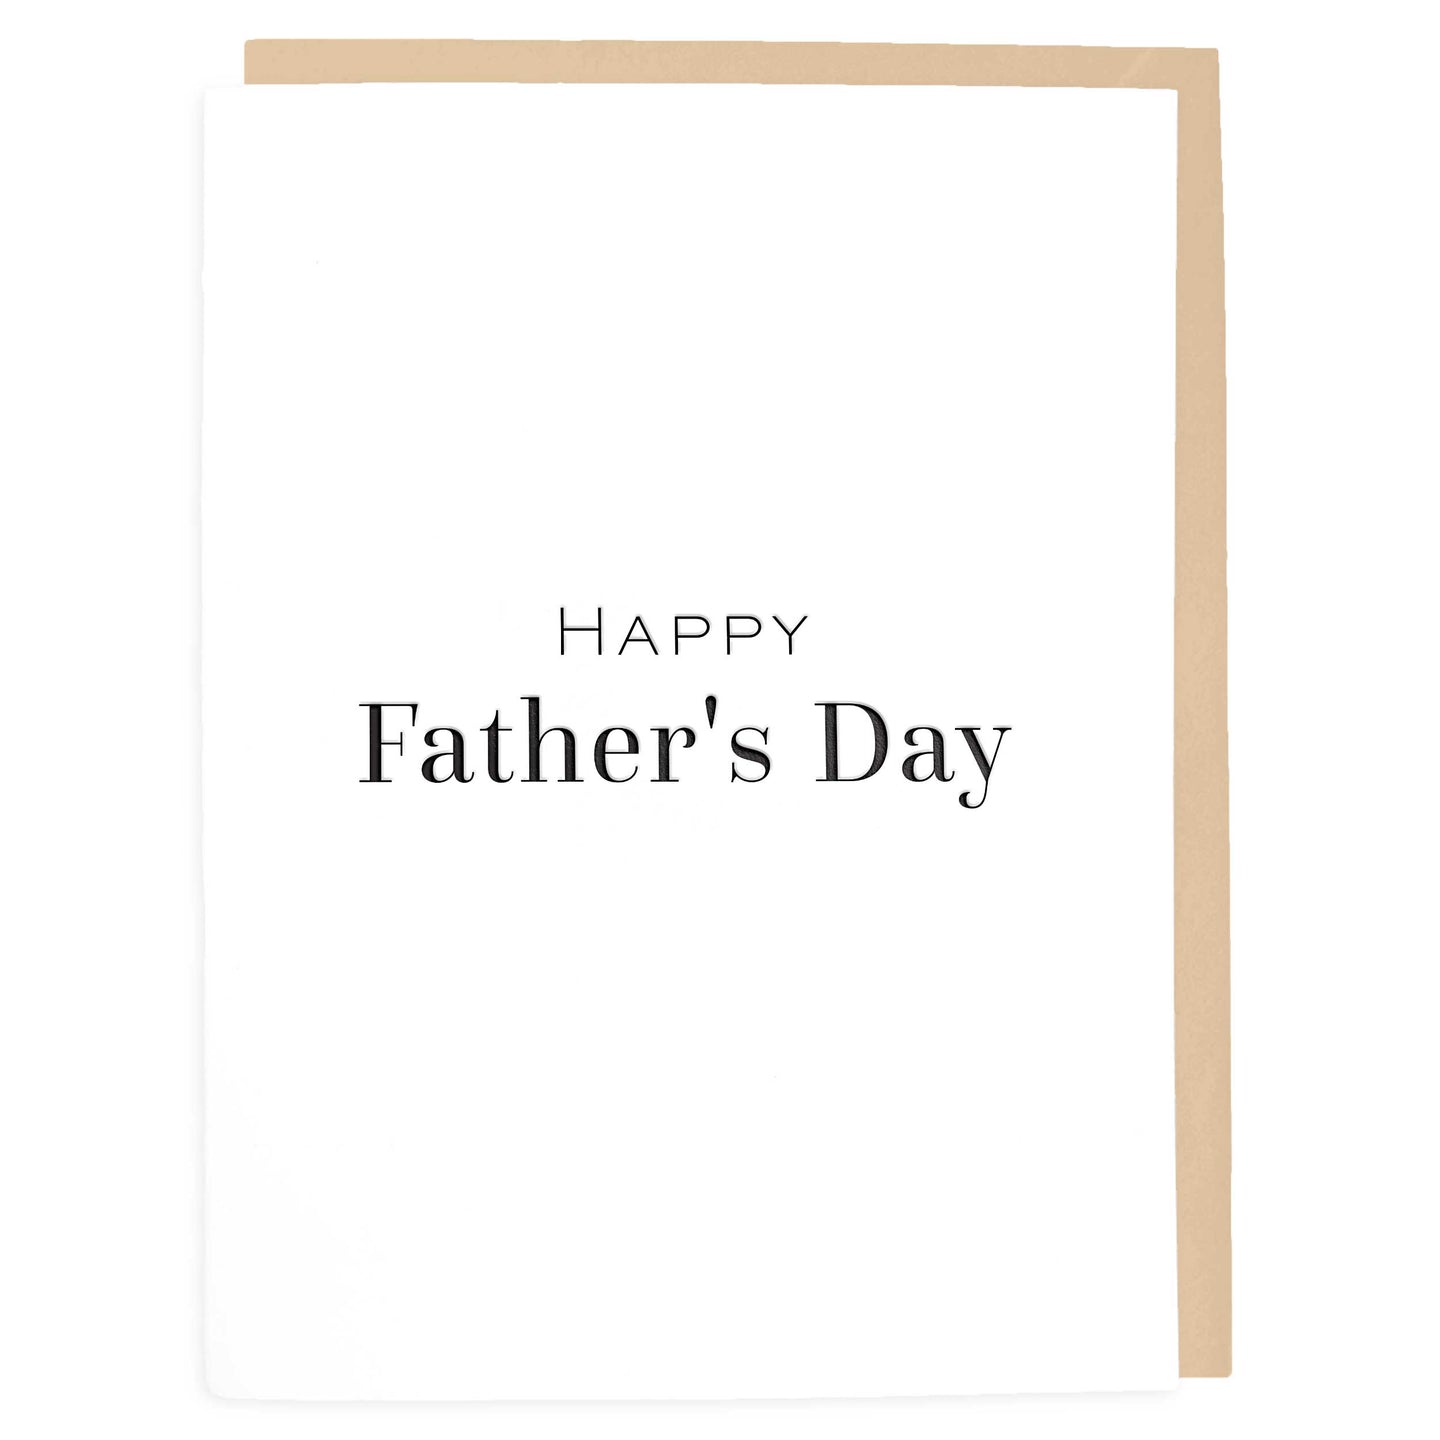 Happy Father's Day Card - Letterpress Greeting Cards - Tea and Becky